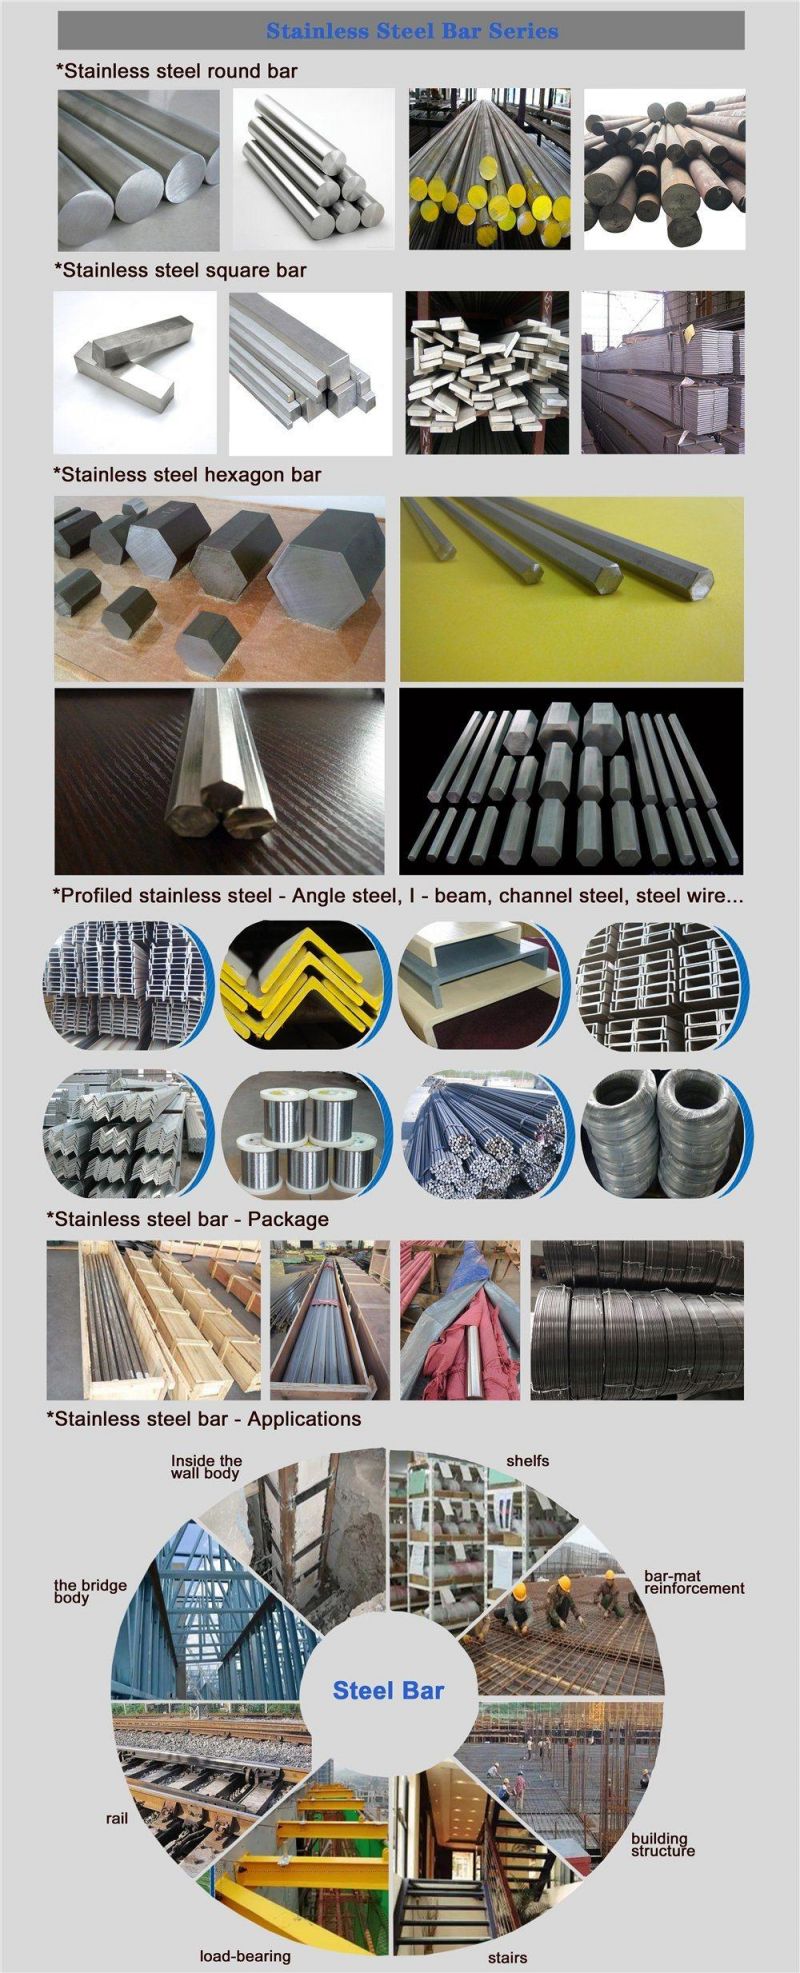 Good Quality Factory Directly SUS 304 Stainless Steel C Channel U Channel Good Material 17-4pH